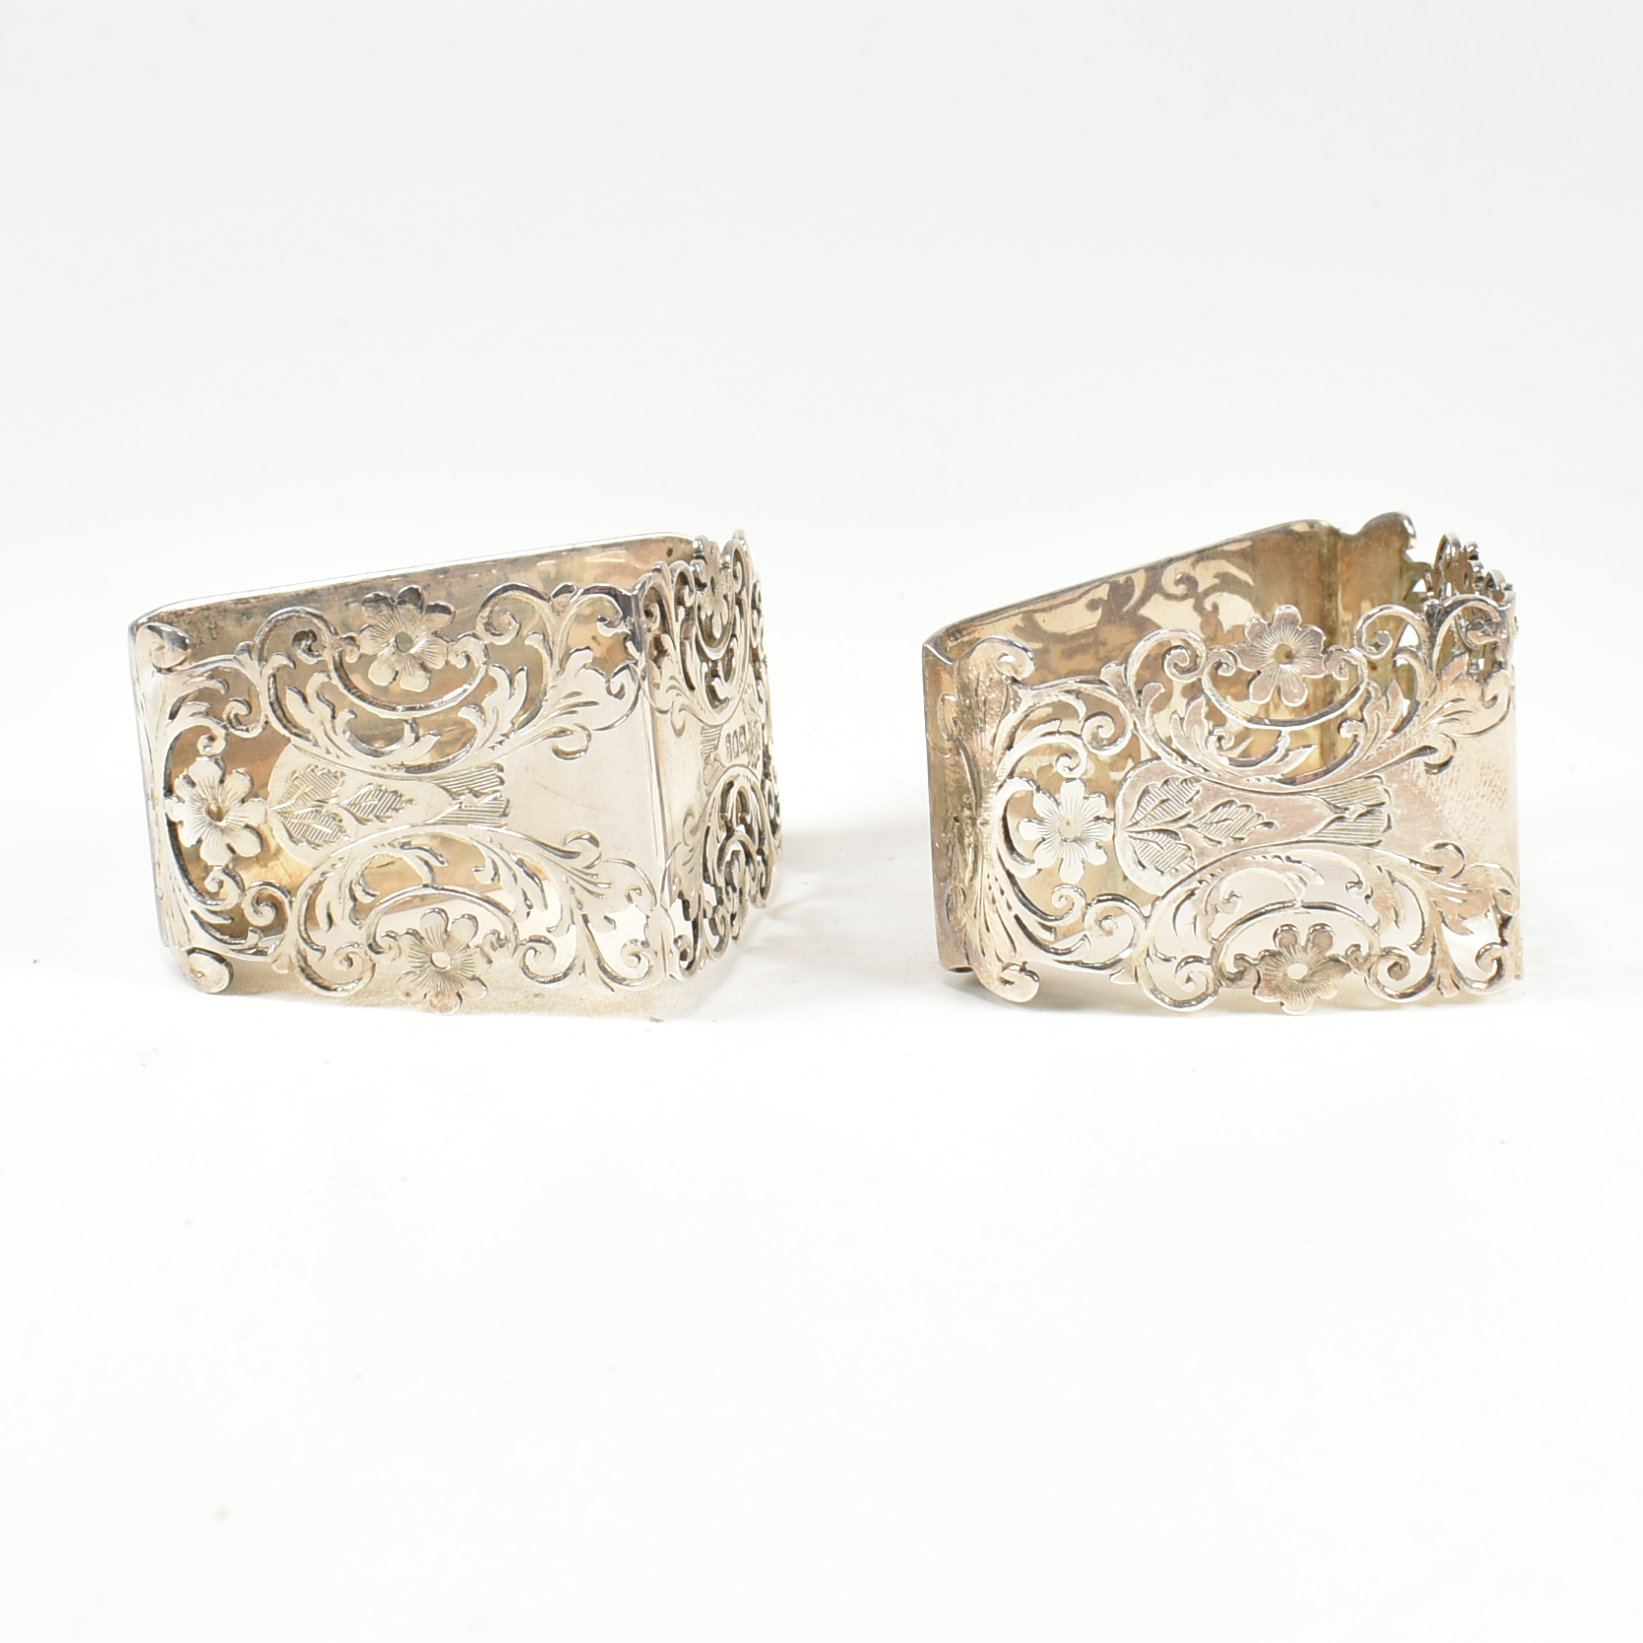 EDWARD VII CASED PAIR OF HALLMARKED SILVER NAPKIN RINGS - Image 6 of 9